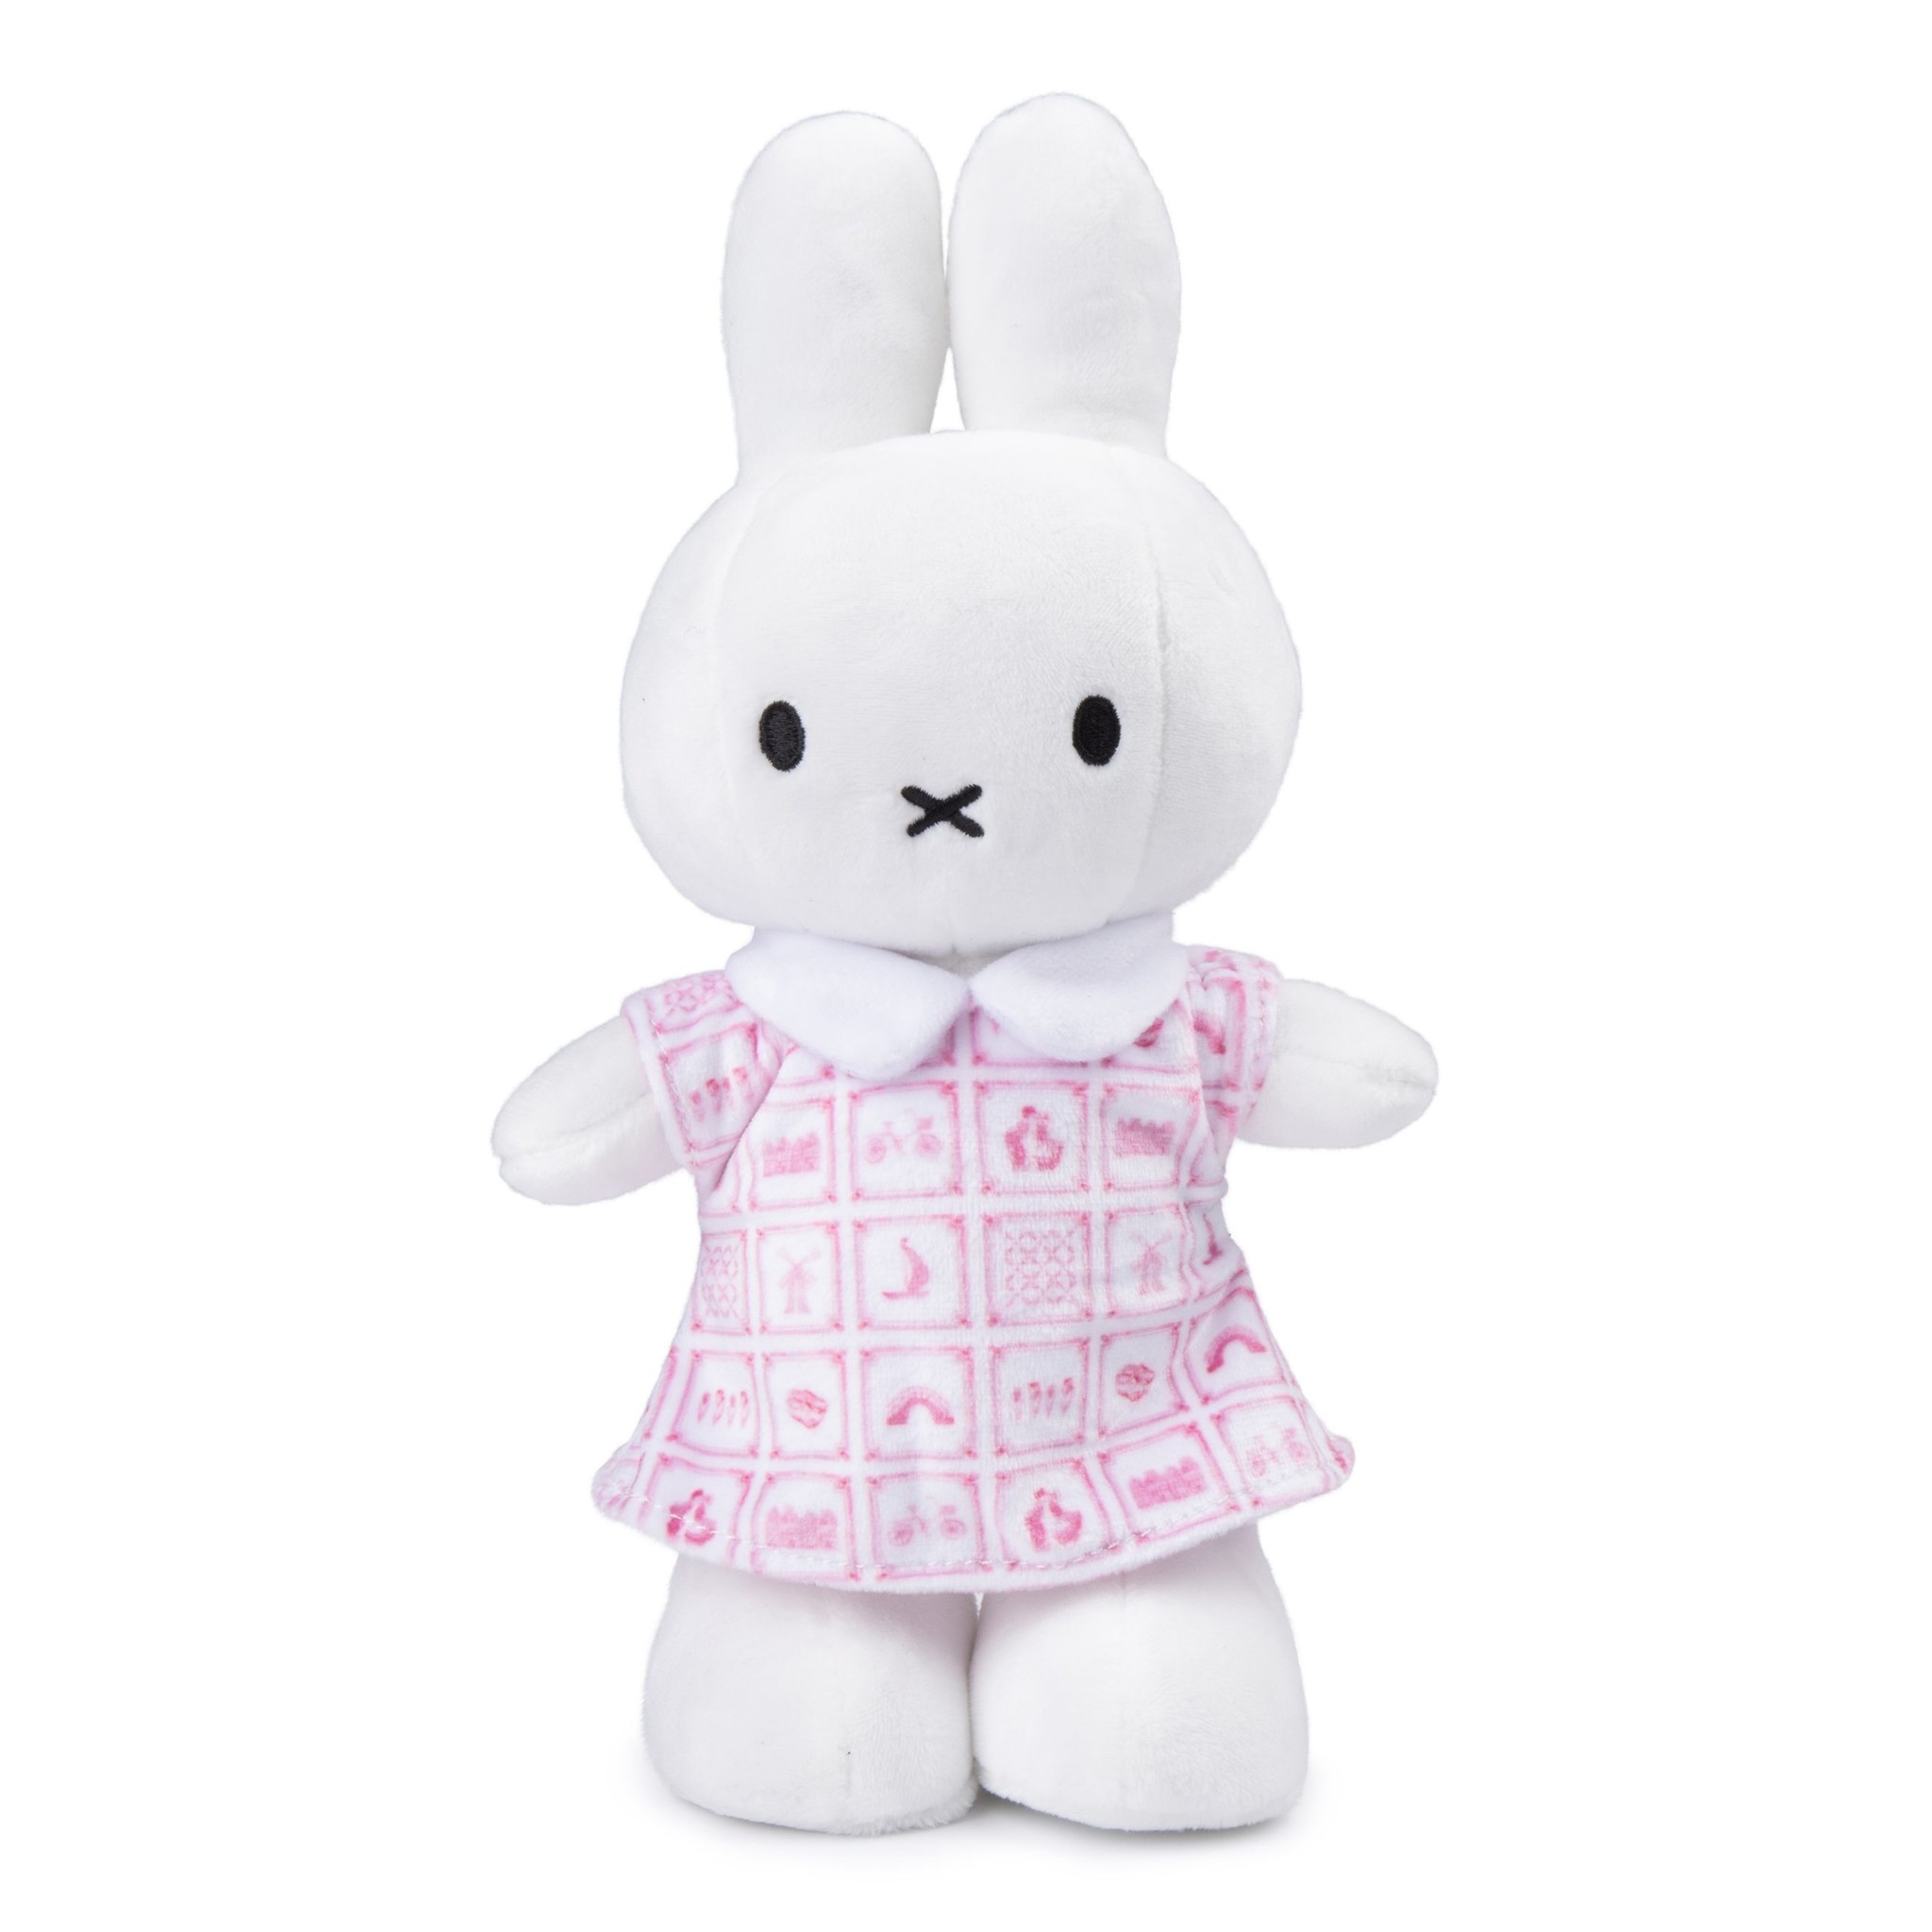 Typically Dutch - Miffy gift set - slippers and cuddly toy - www